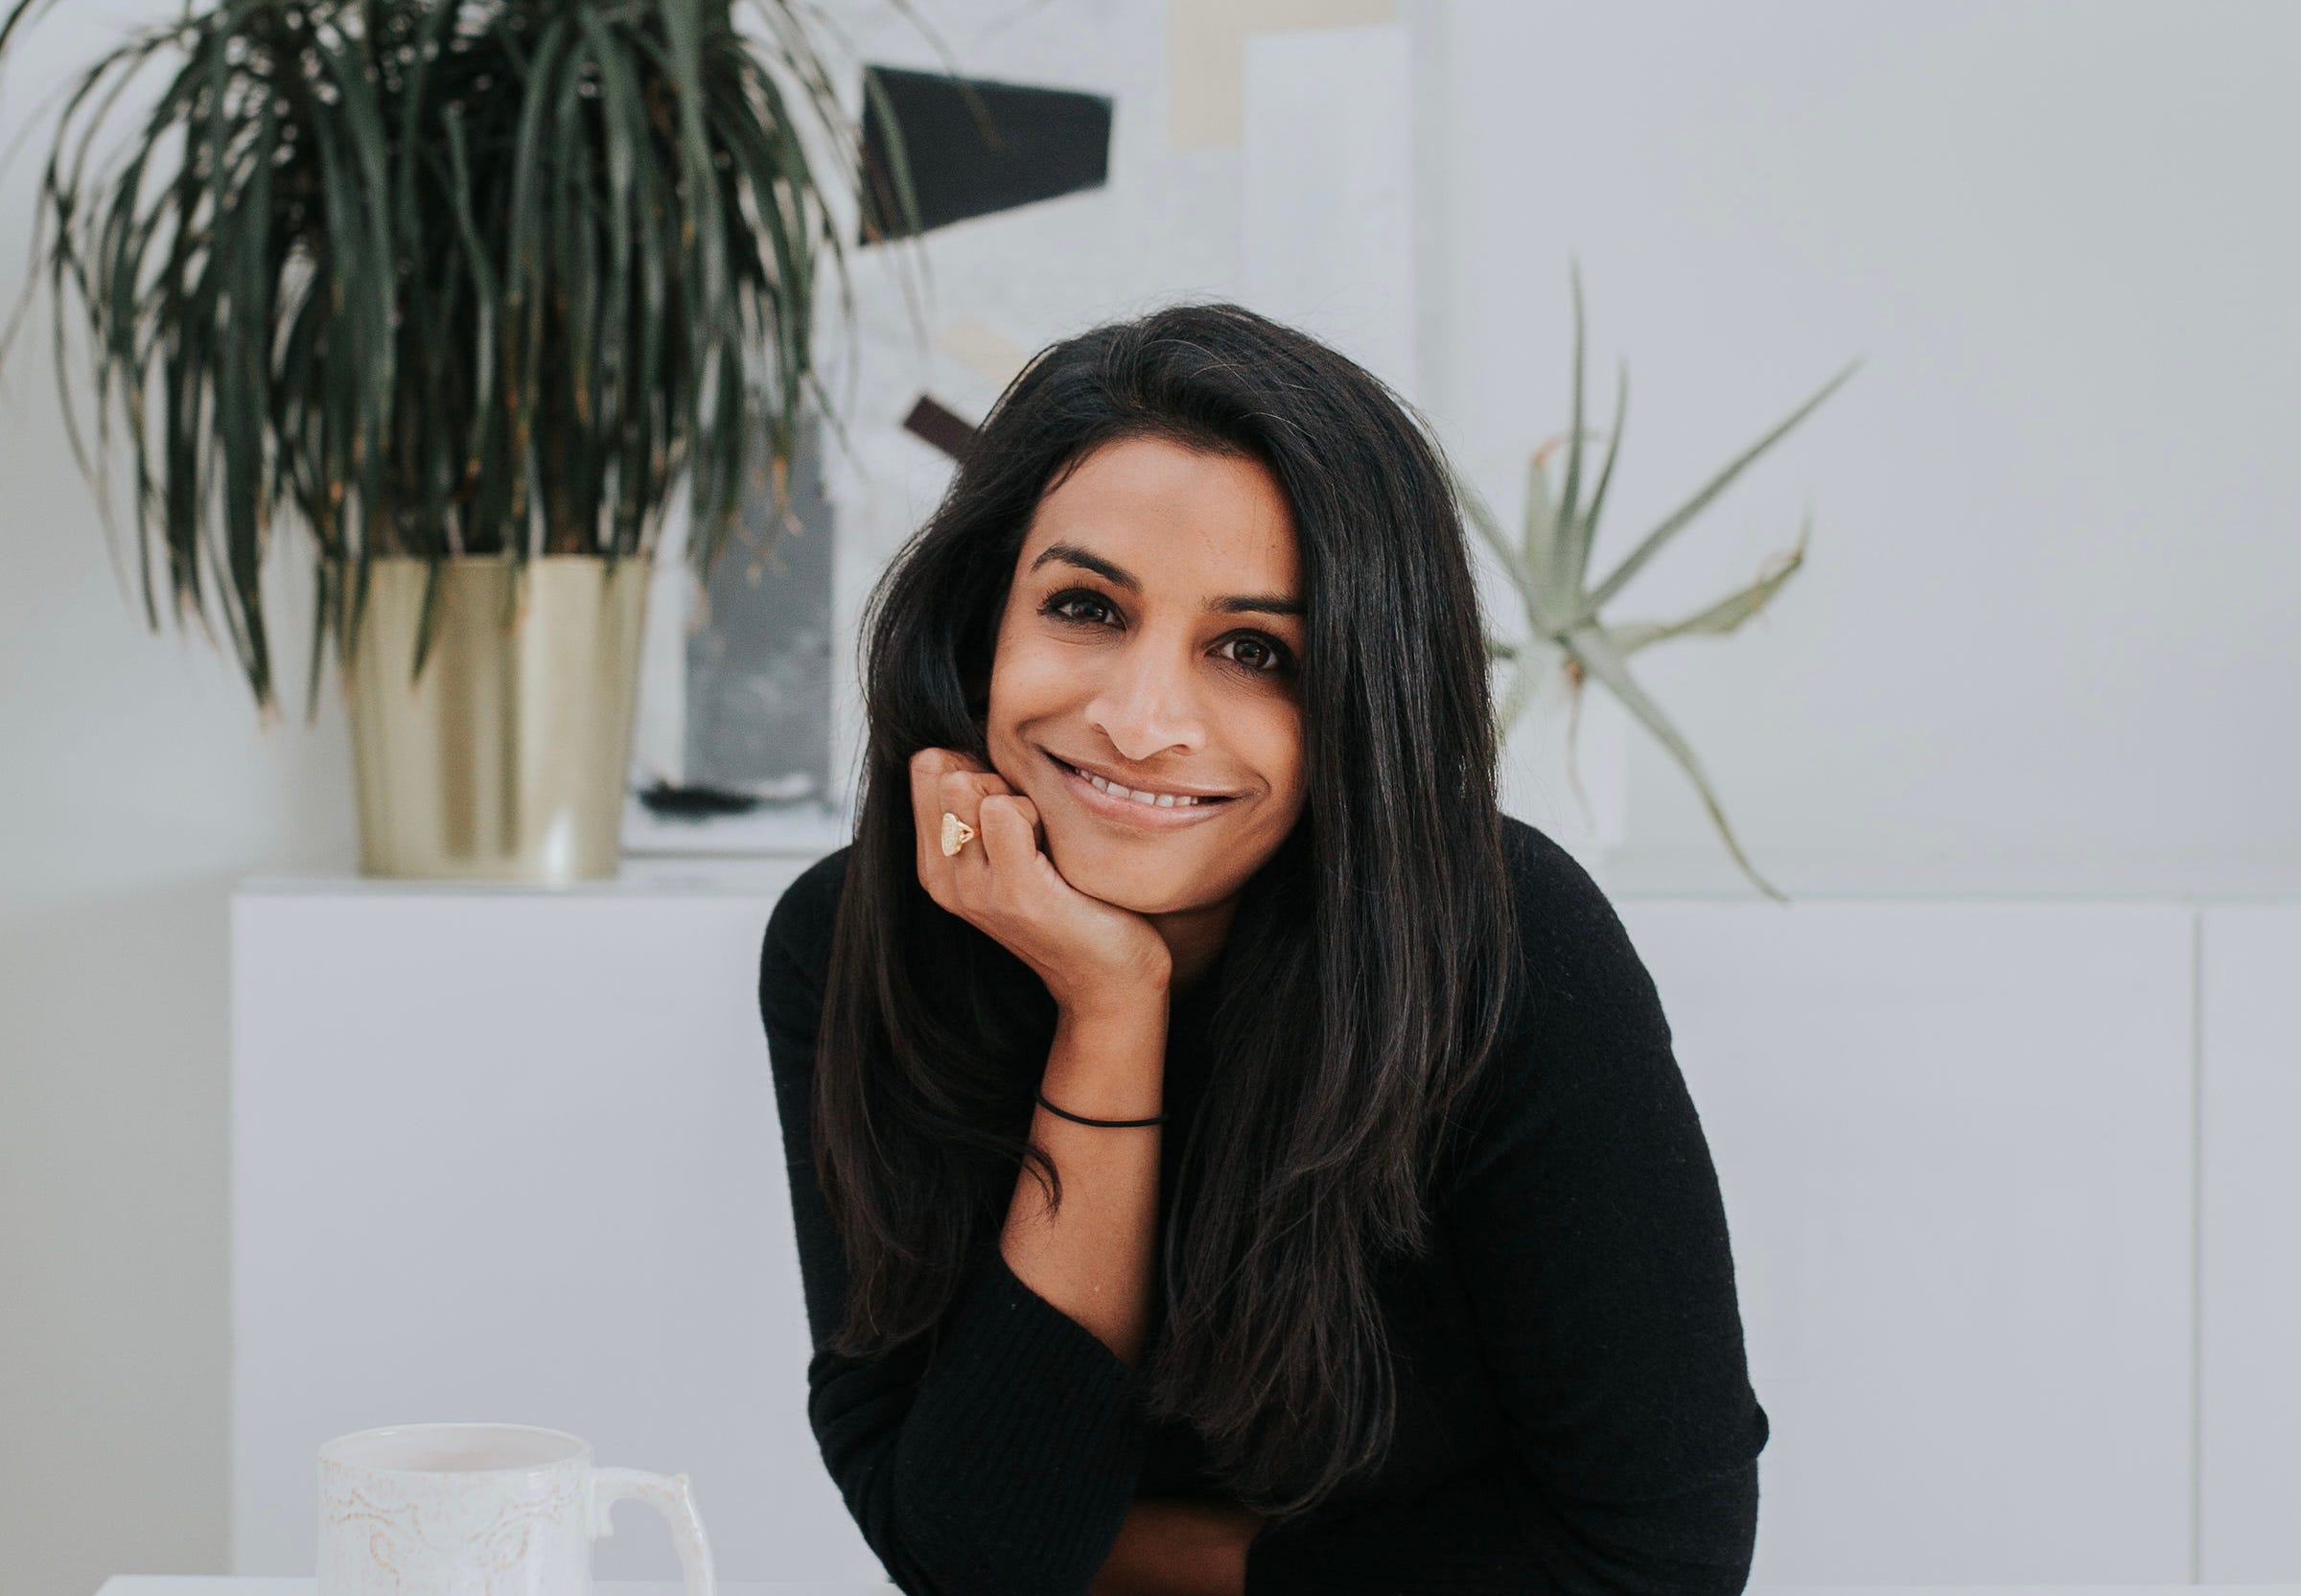 Real Self-Care and Breaking Free from Wellness Culture with Pooja Lakshmin